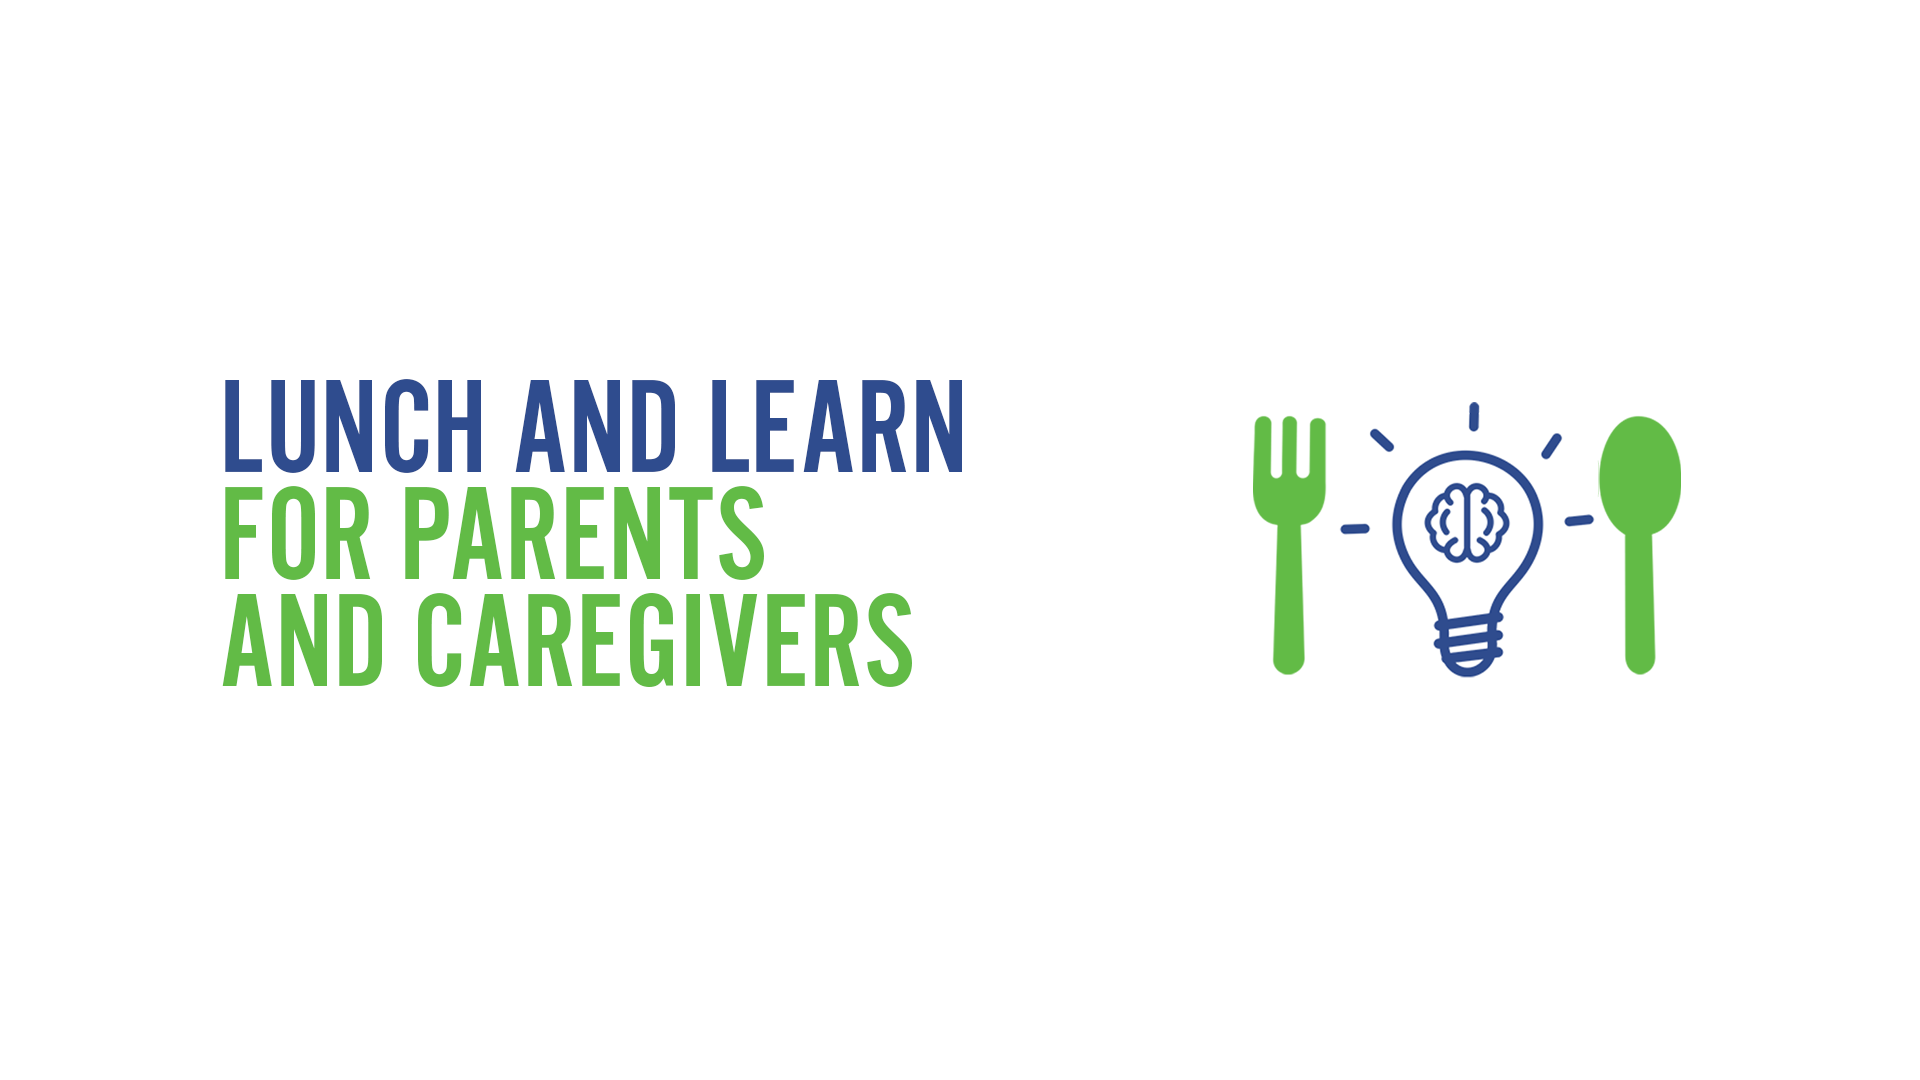 Lunch and Learn for Parents and Caregivers